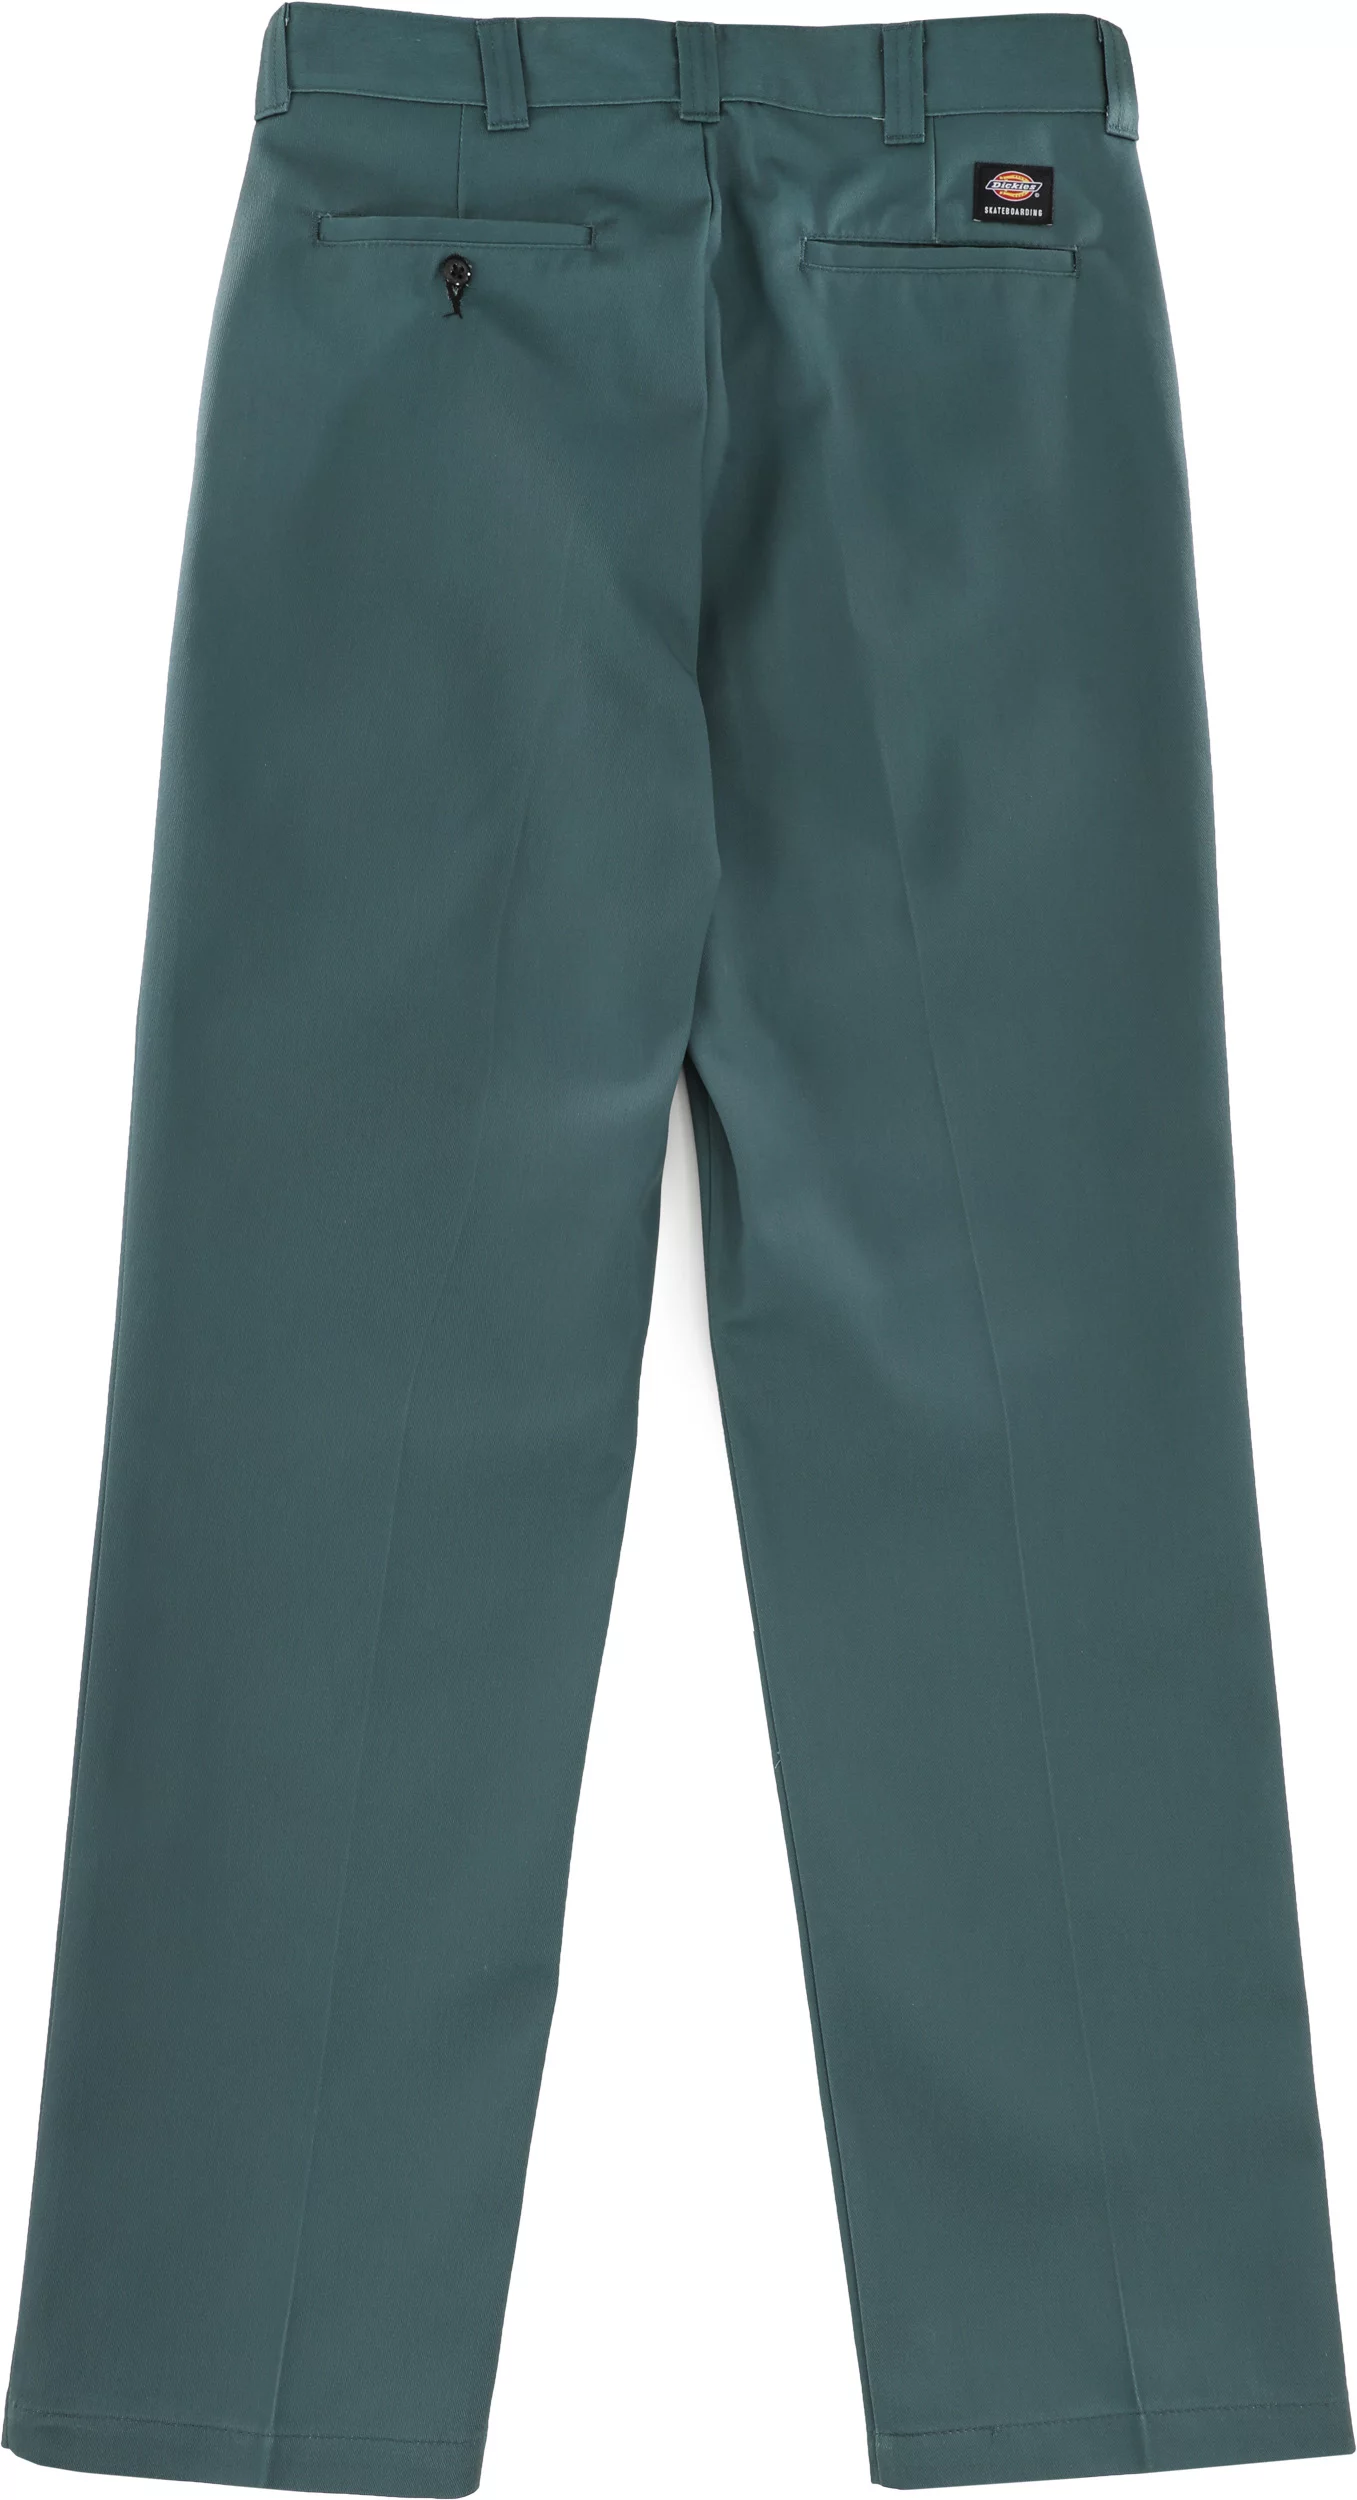 Dickies 874 Work Pants Relaxed Fit (Lincoln green)